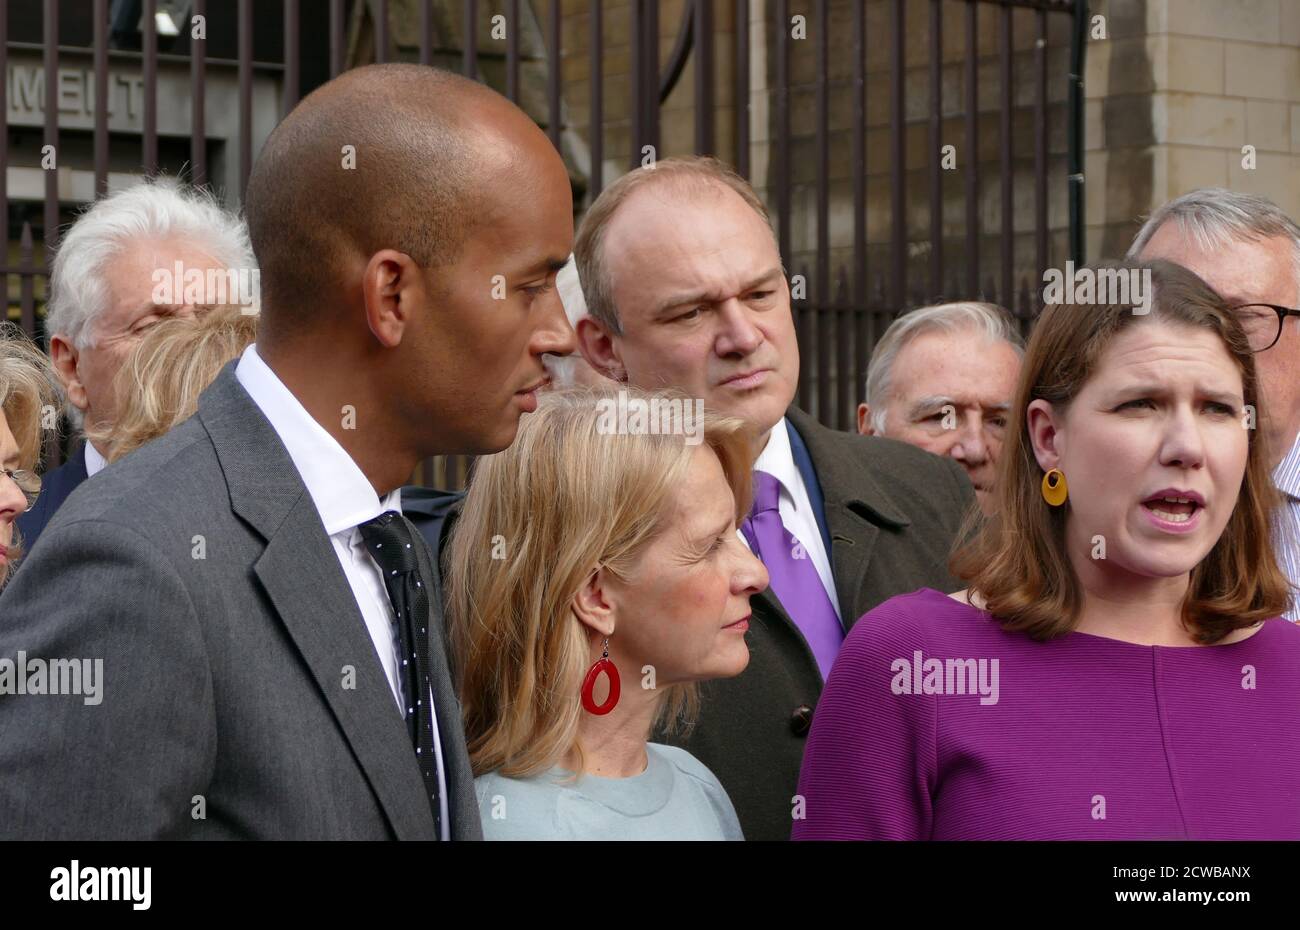 Chuka Umunna with Liberal Democrat leader, Jo Swinson, at a press conference, after returning to parliament after the prorogation was annulled by the Supreme Court. 25th September 2019. Chuka Umunna (born 1978), British Liberal Democrat politician serving as Member of Parliament (MP) for Streatham since 2010, elected as the Labour Party candidate. As a former member of the Opposition Shadow Cabinet, he was Shadow Business Secretary from 2011 to 2015. He was a member of the Labour Party until February 2019, when he resigned to form The Independent Group (later renamed Change UK) along with six Stock Photo